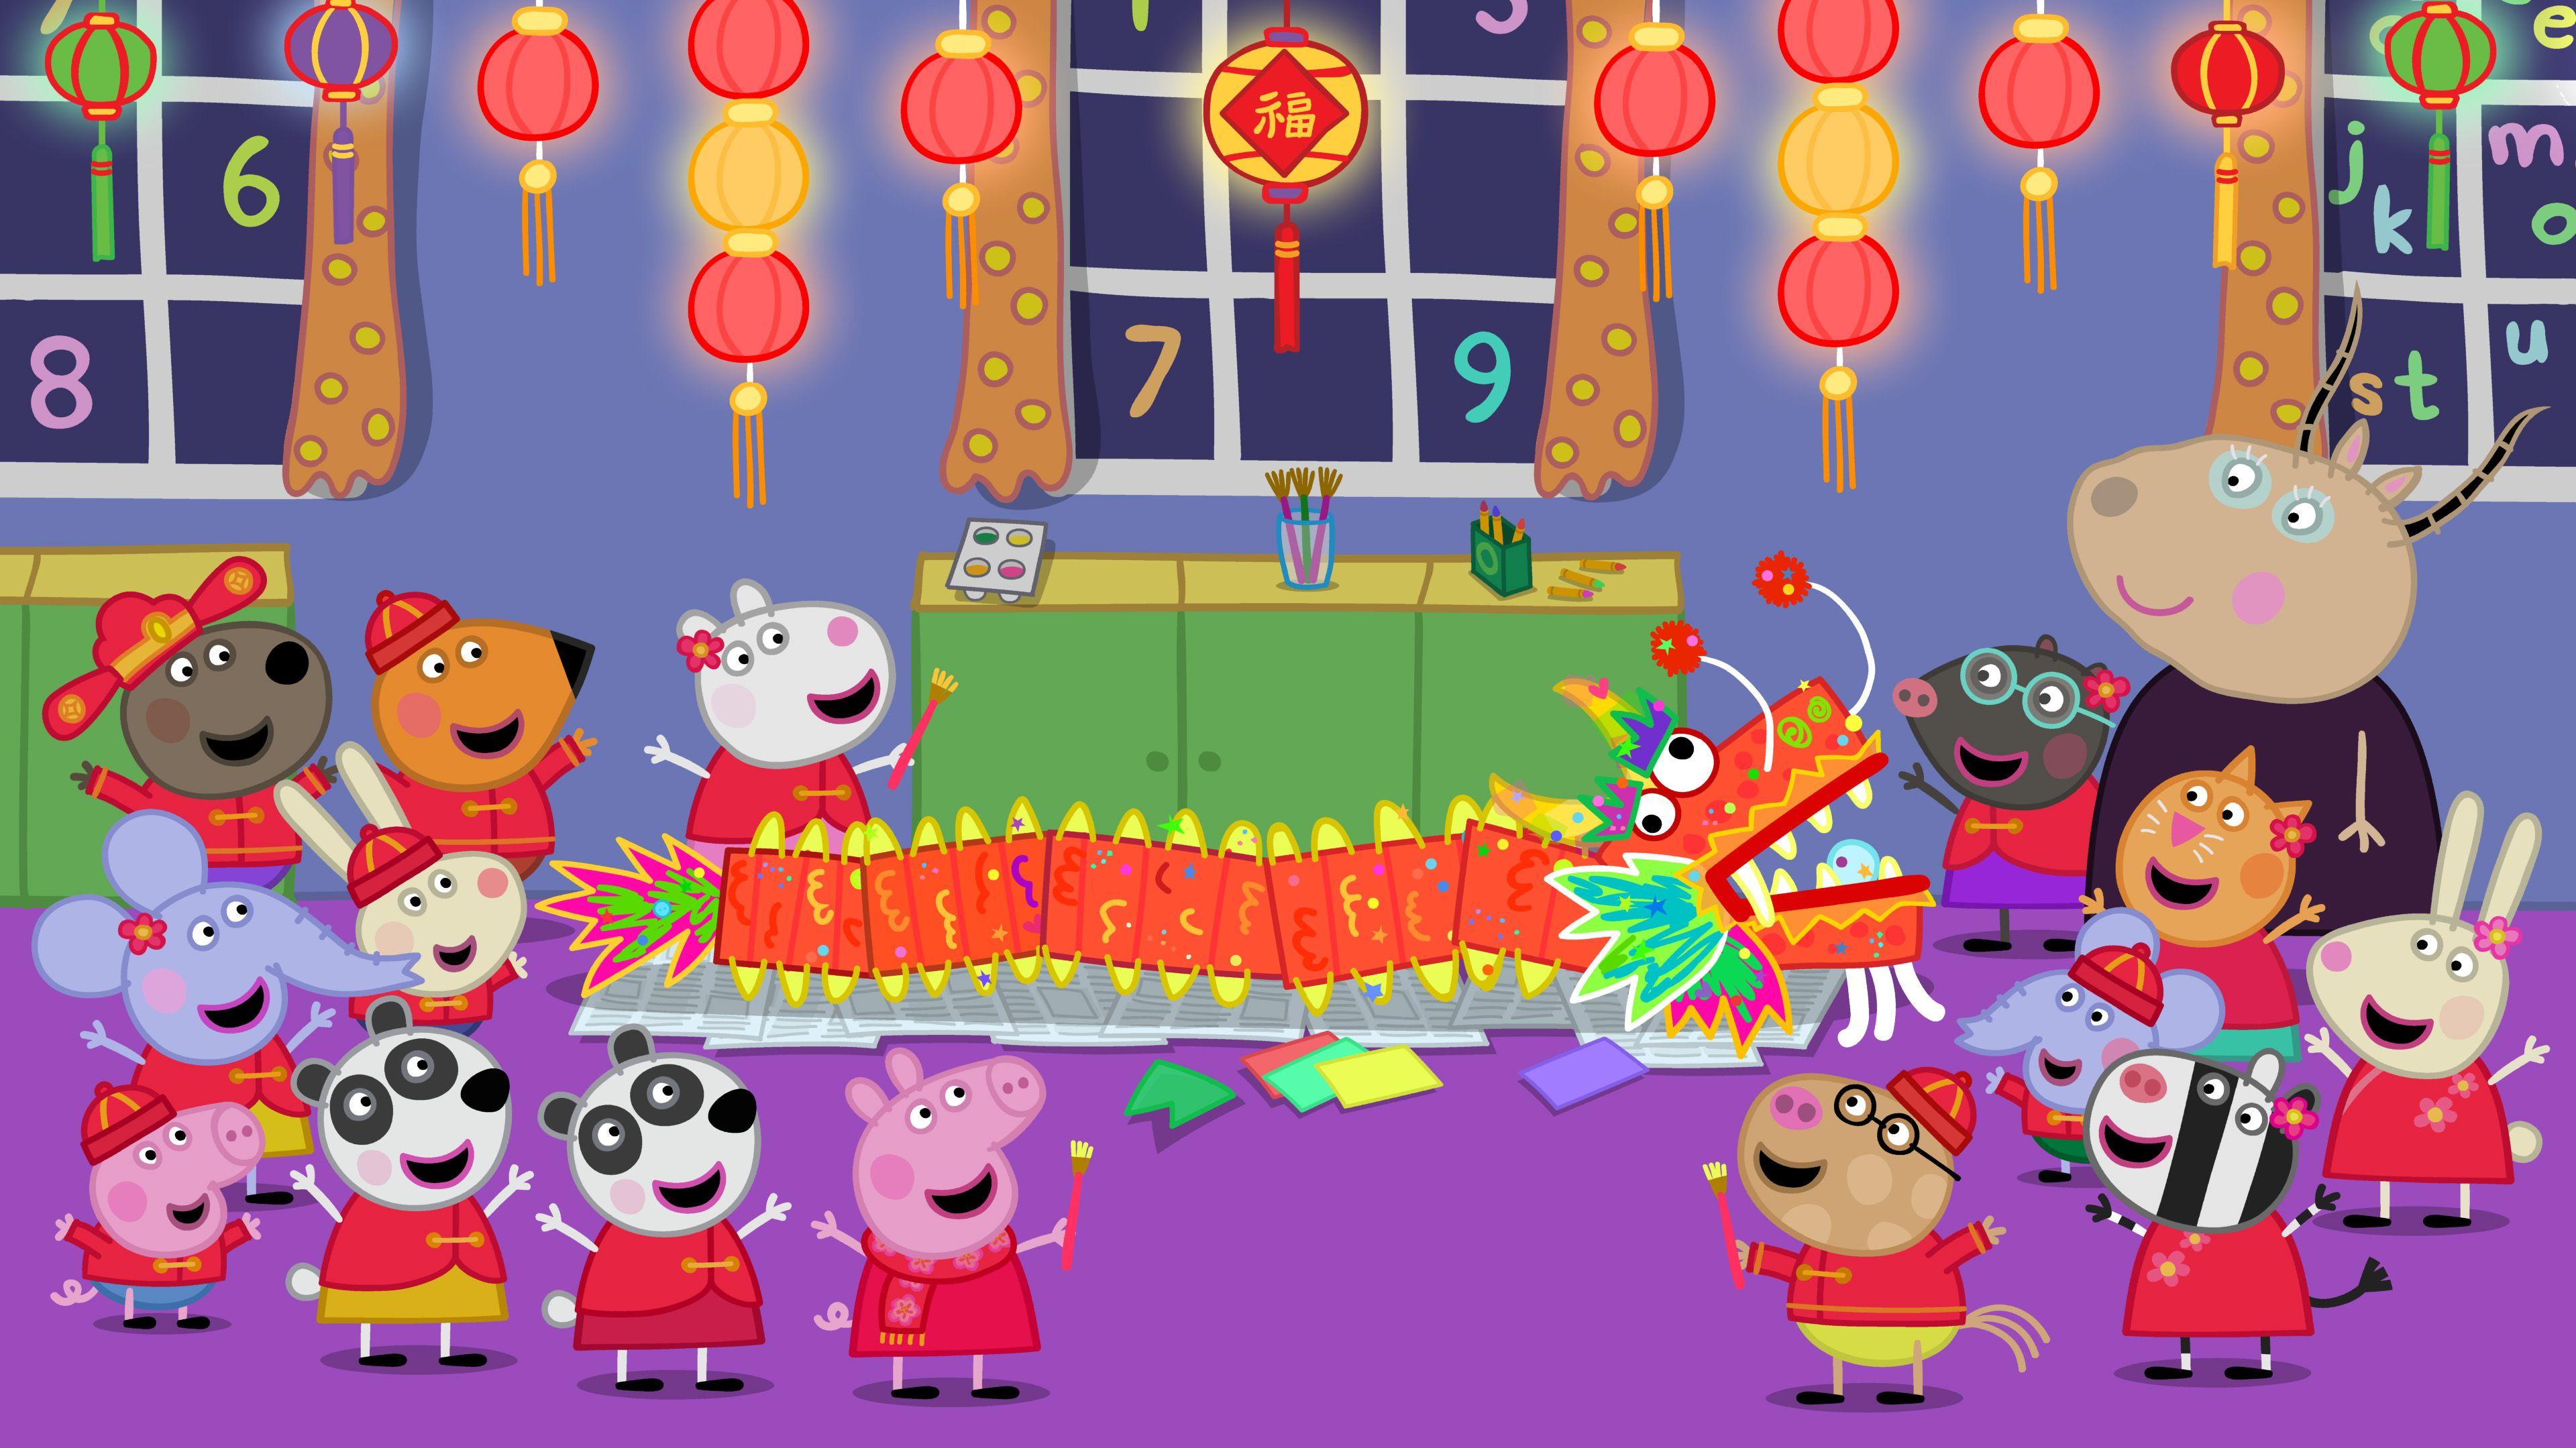 Heres a Sneak Peek of the Chinese New Year Episode of Peppa Pig